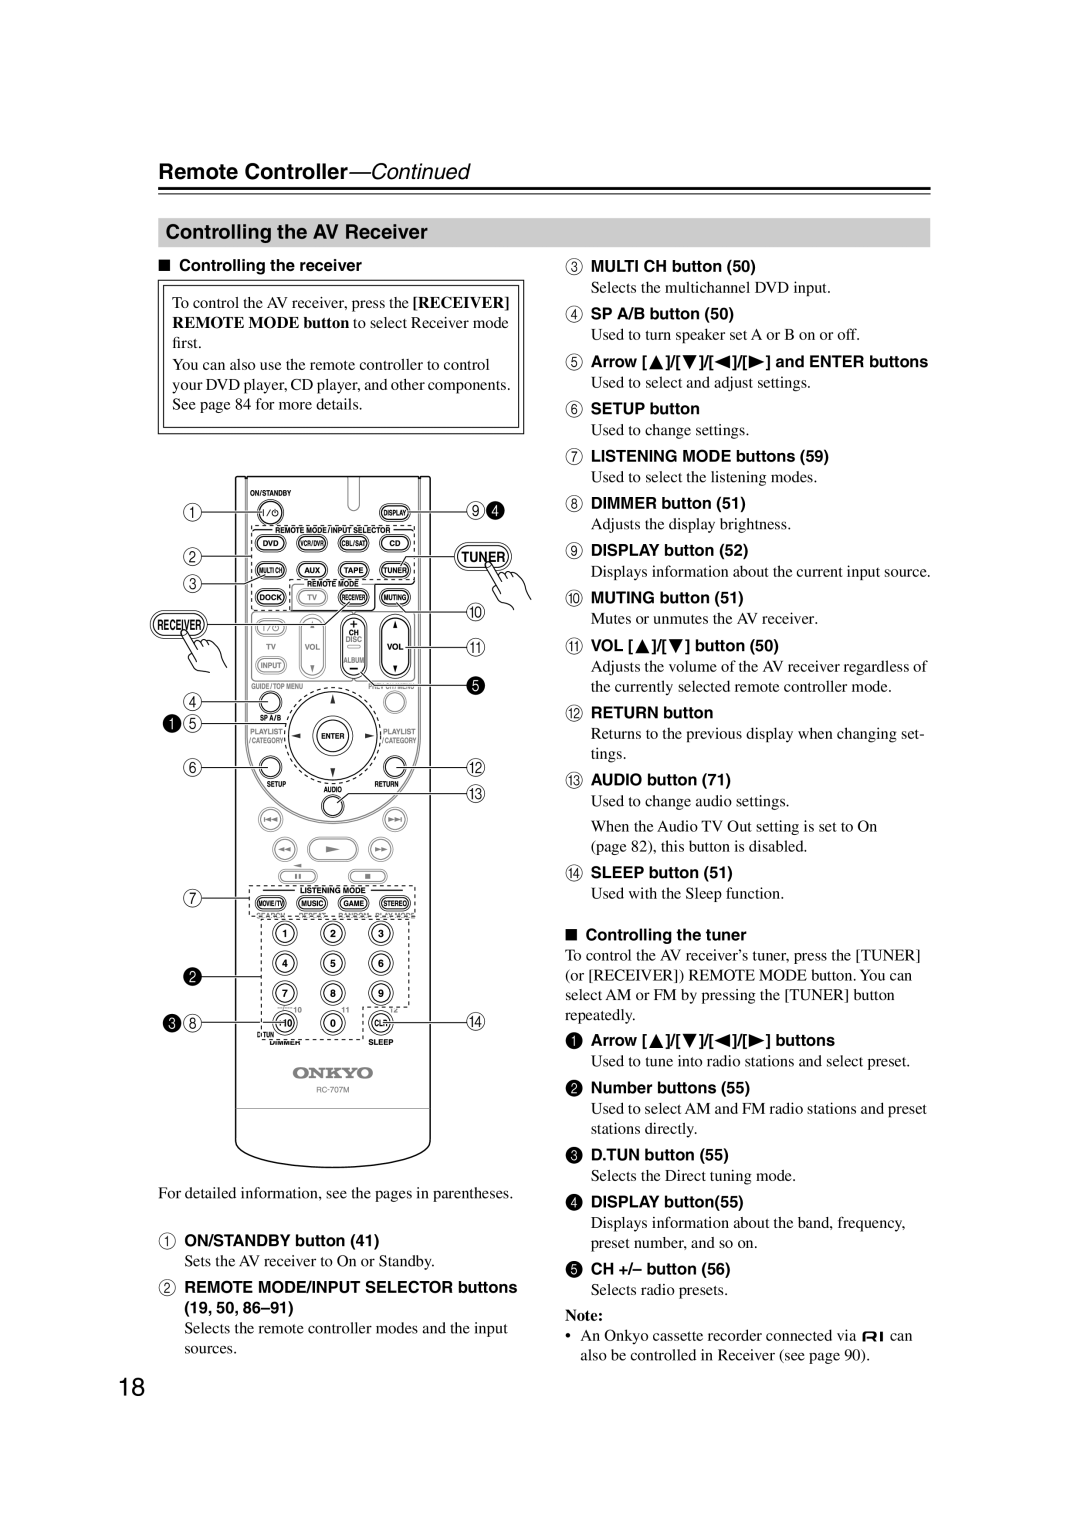 Onkyo HT-S6100 instruction manual Remote Controller-Continued, Controlling the AV Receiver 